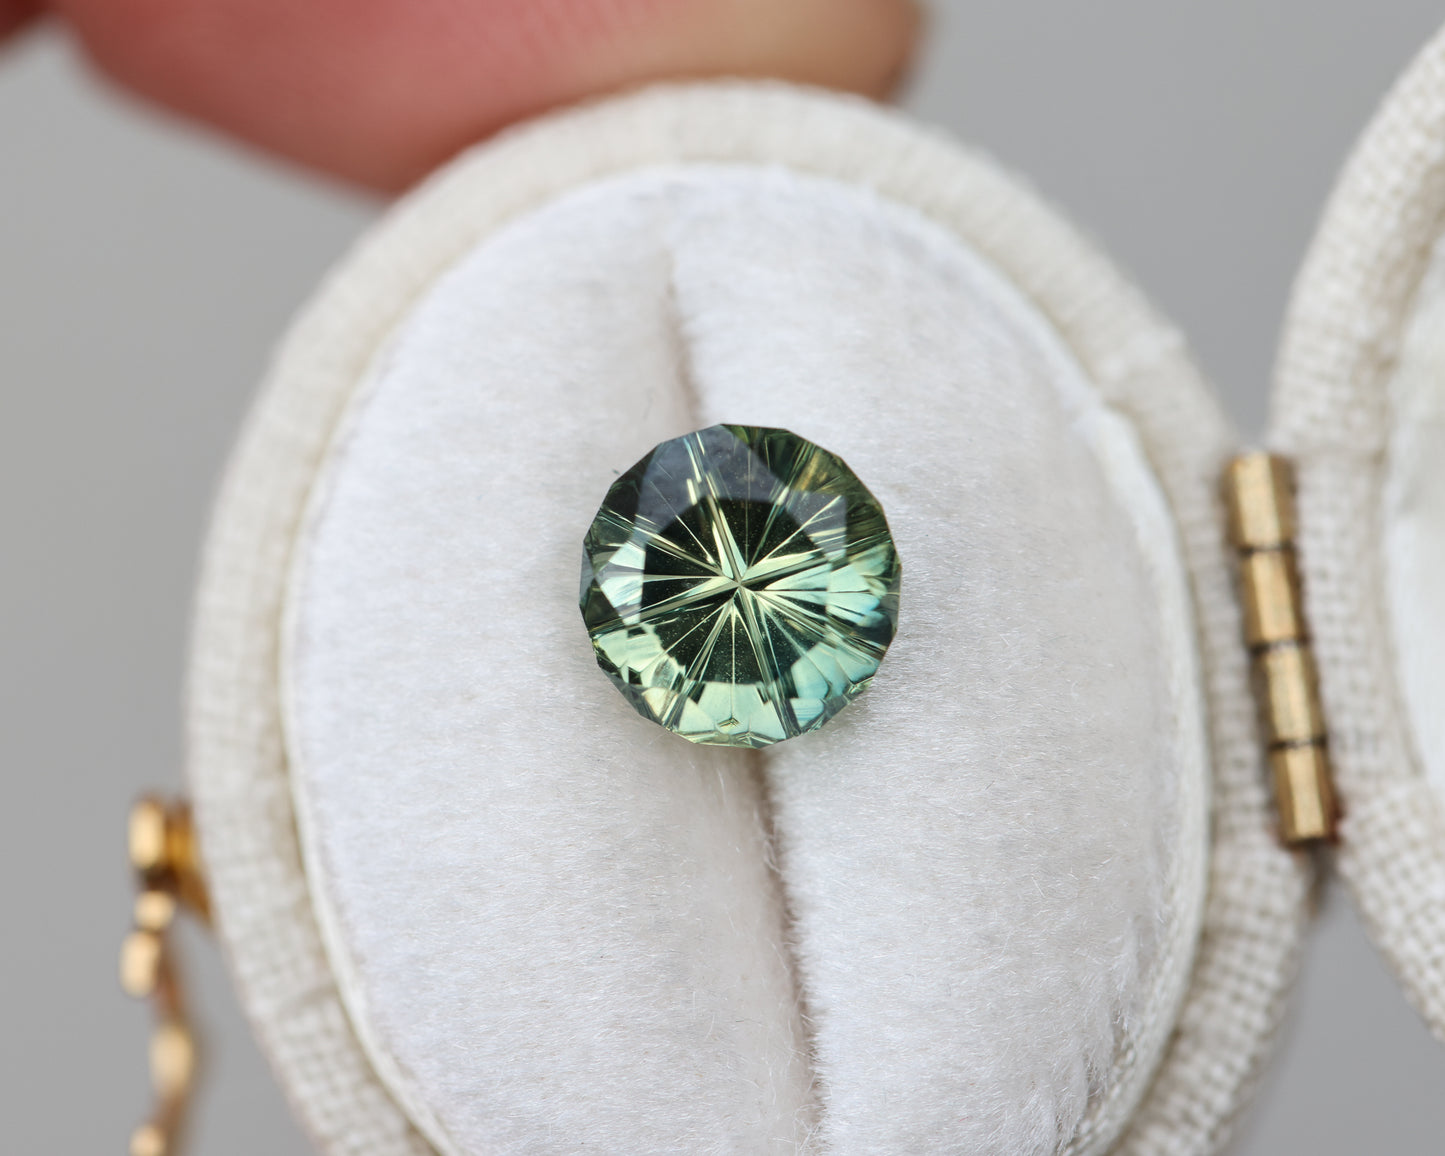 ON HOLD - 2.35ct round green teal sapphire - Starbrite cut by John Dyer